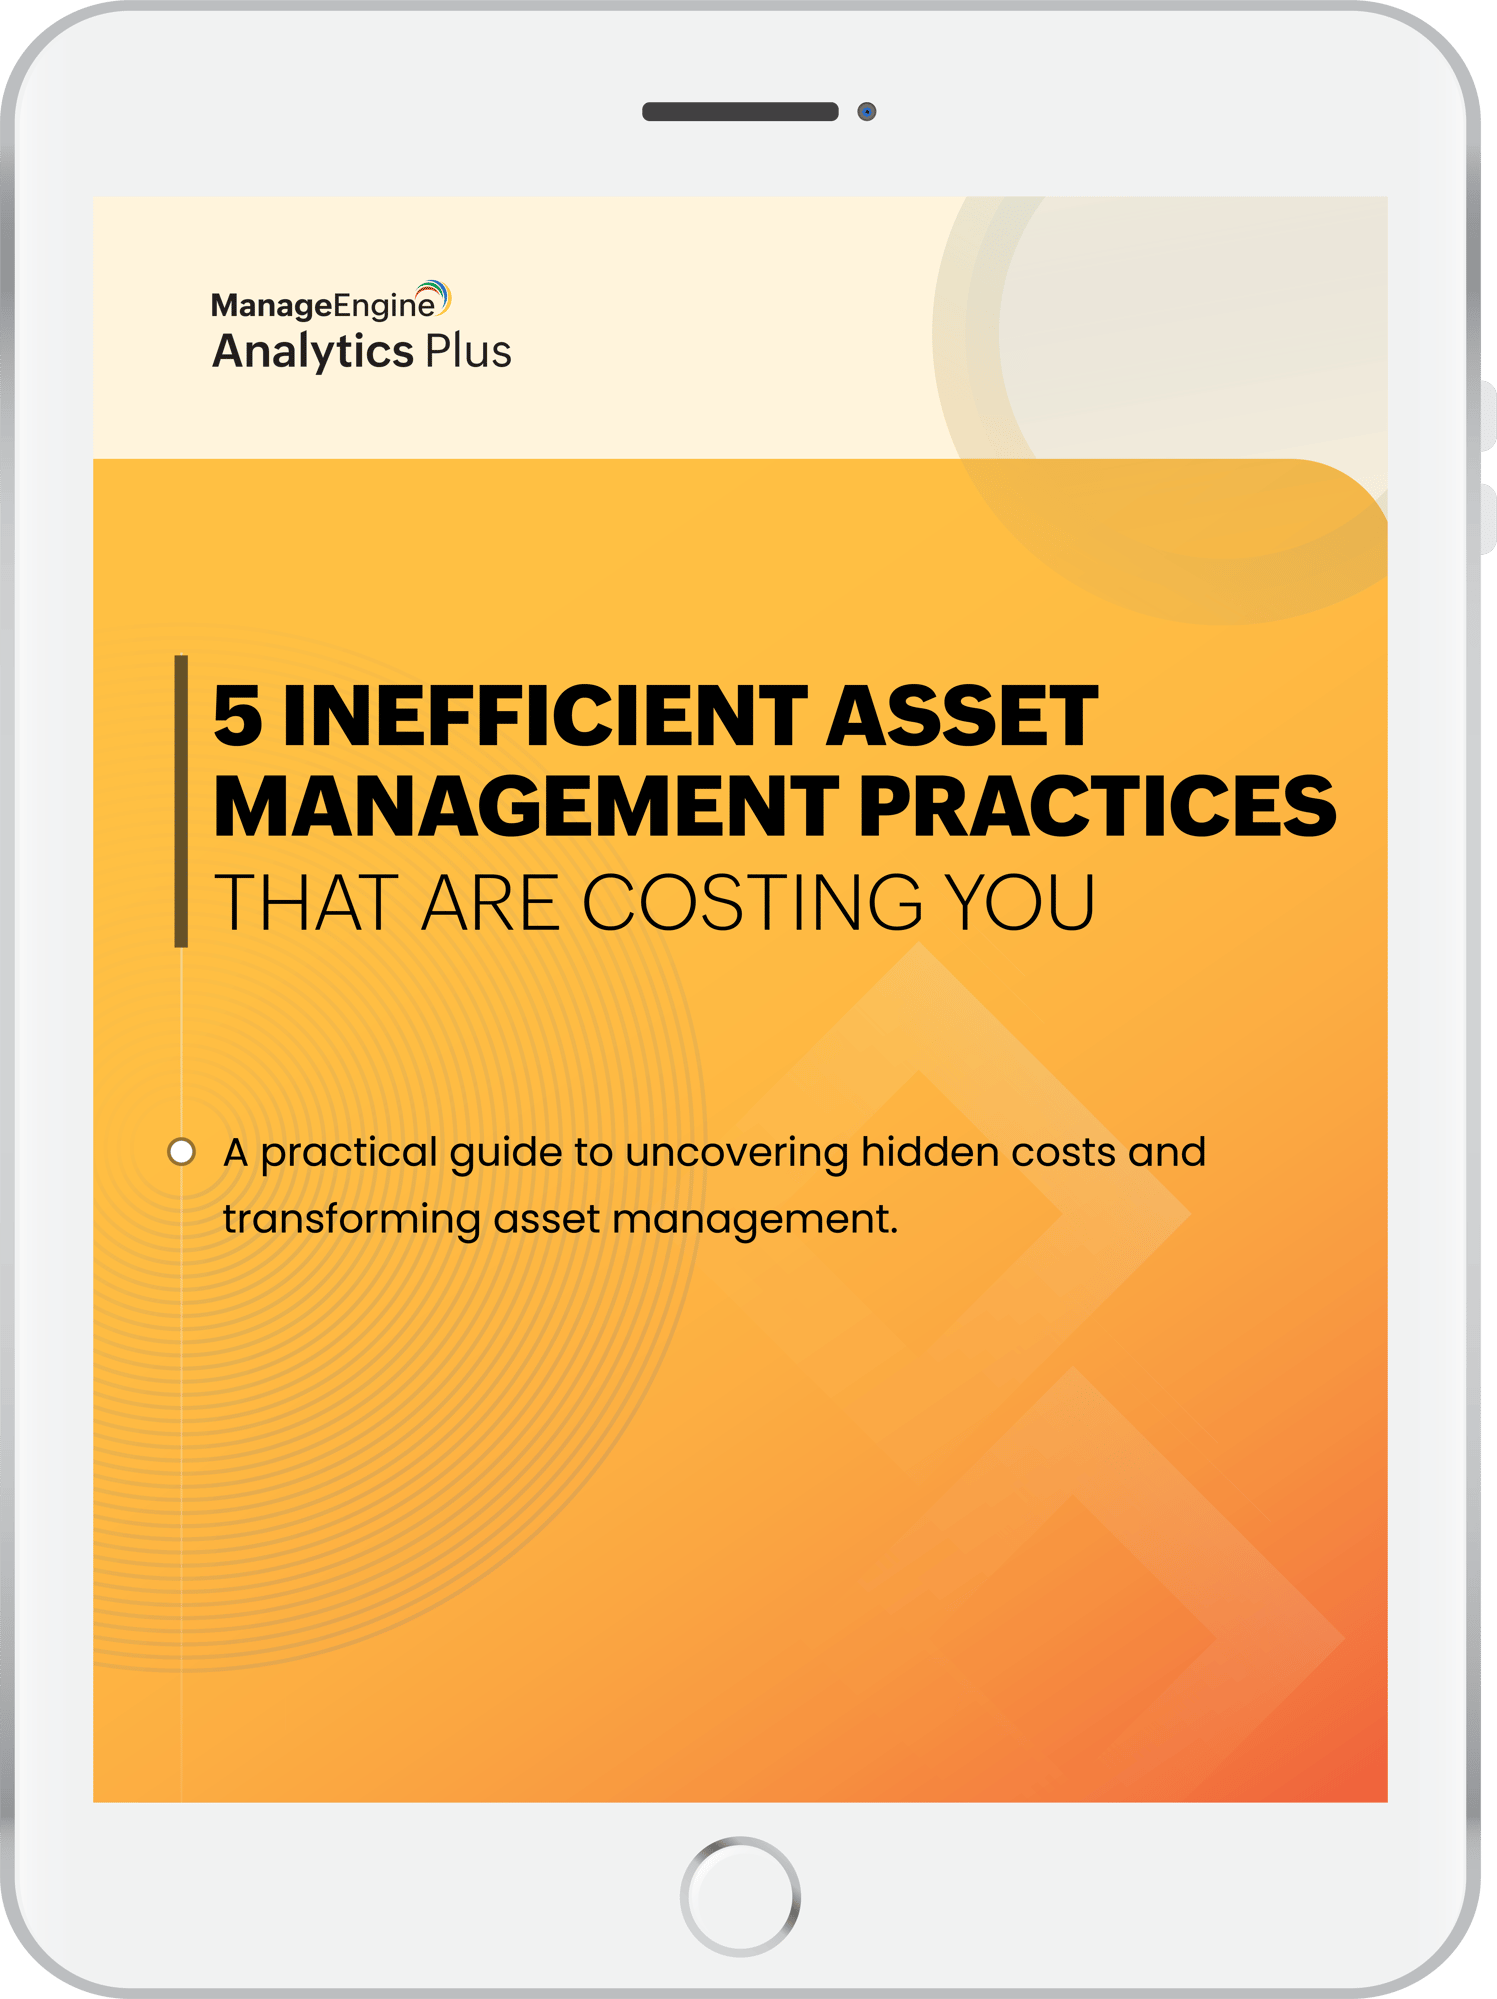 Ebook_ipad-cover_template-on inefficient asset management practices that are costing you